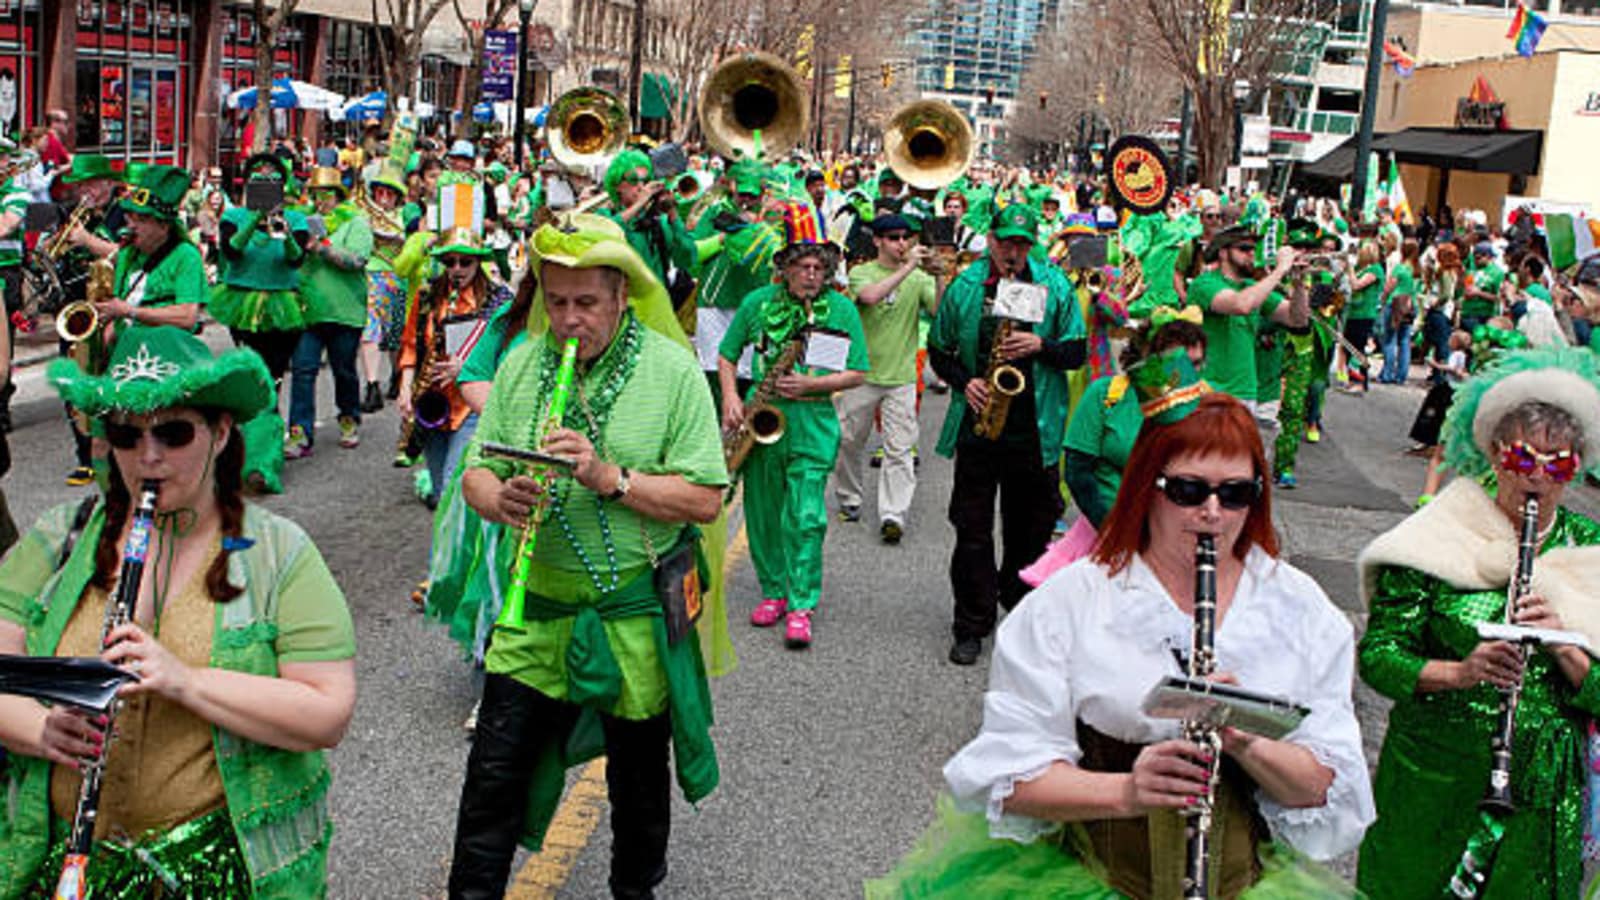 Beforehand Major US cities are green on St. Patrick's Day.